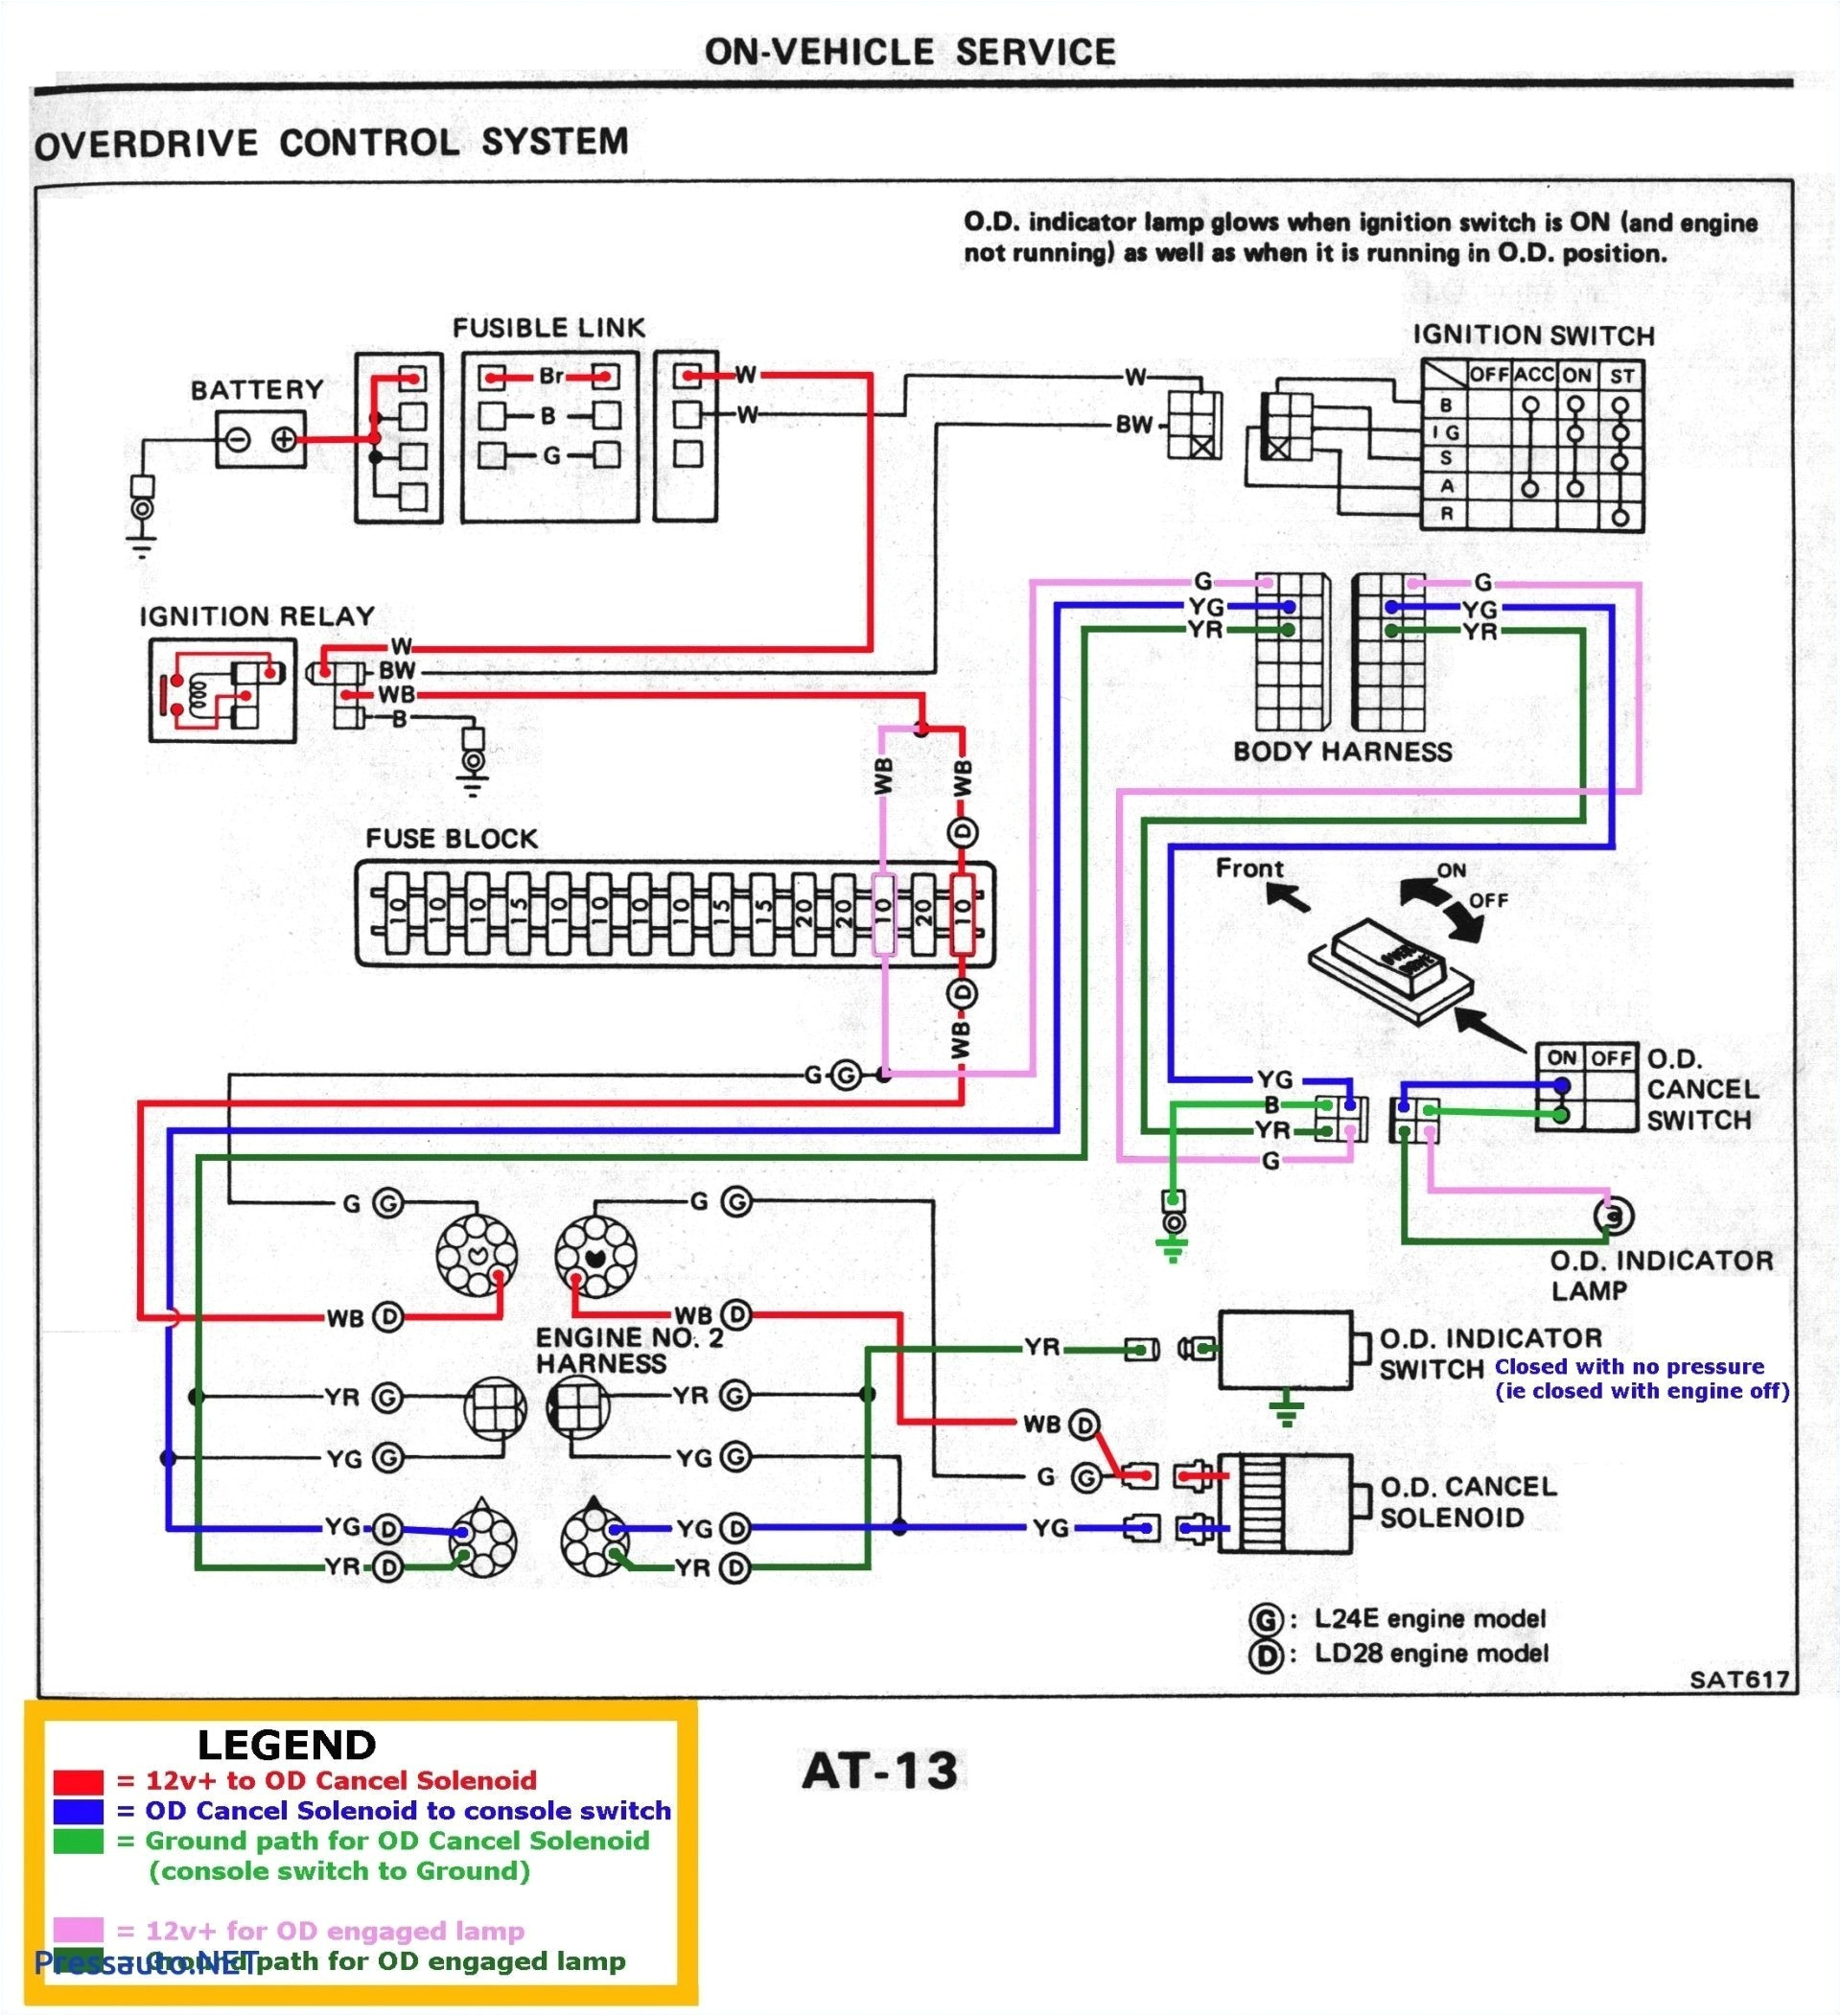 double gang outlet wiring diagram fresh 4 gang wiring diagram double gang outlet wiring